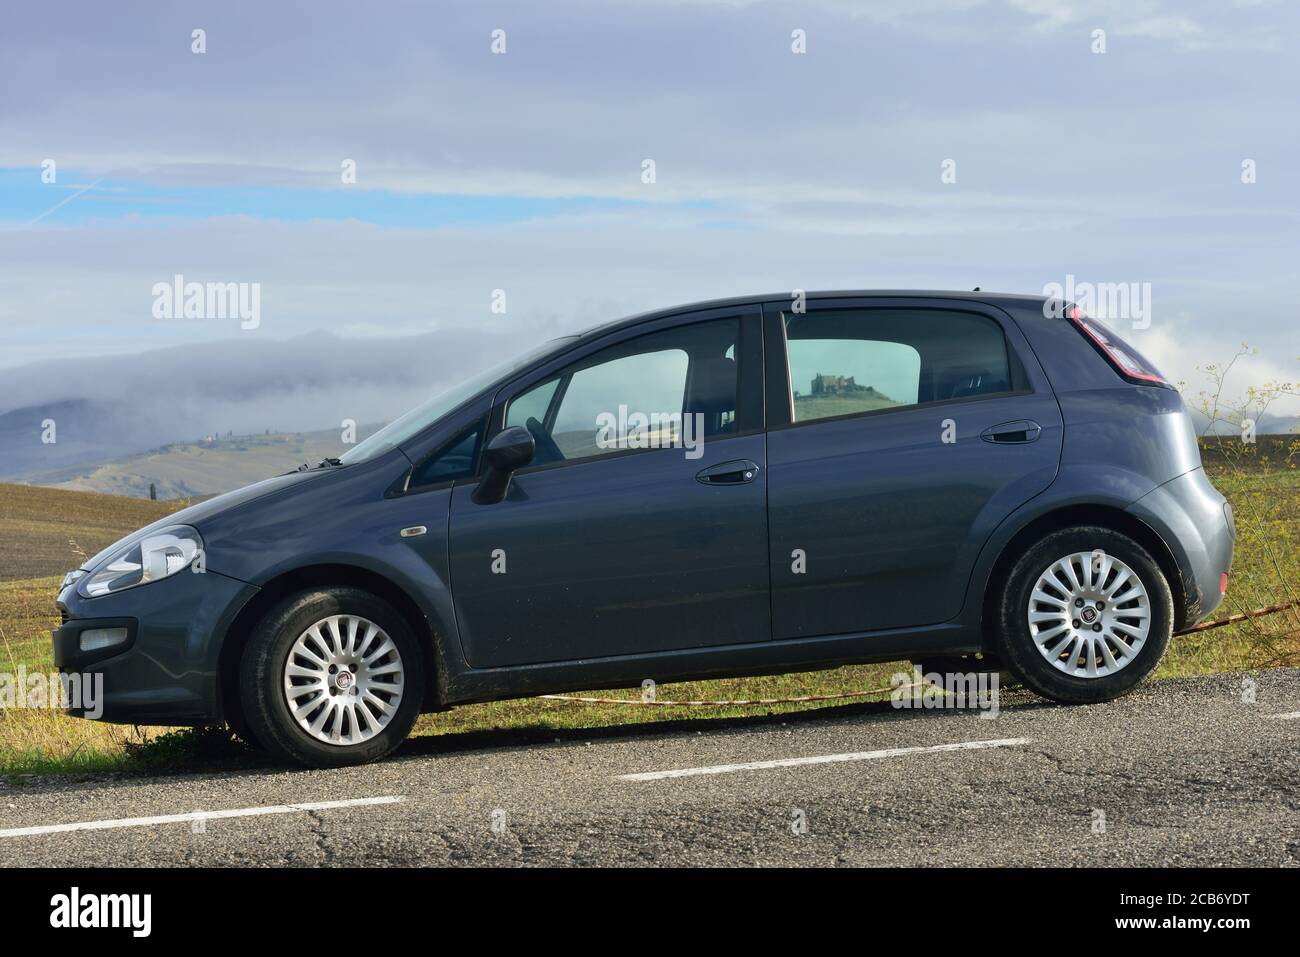 Pienza, Italy - October 13, 2012: Fiat Punto Evo car parked in front of wonderful landscape with hills with autumns grain fields and old castle seen t Stock Photo